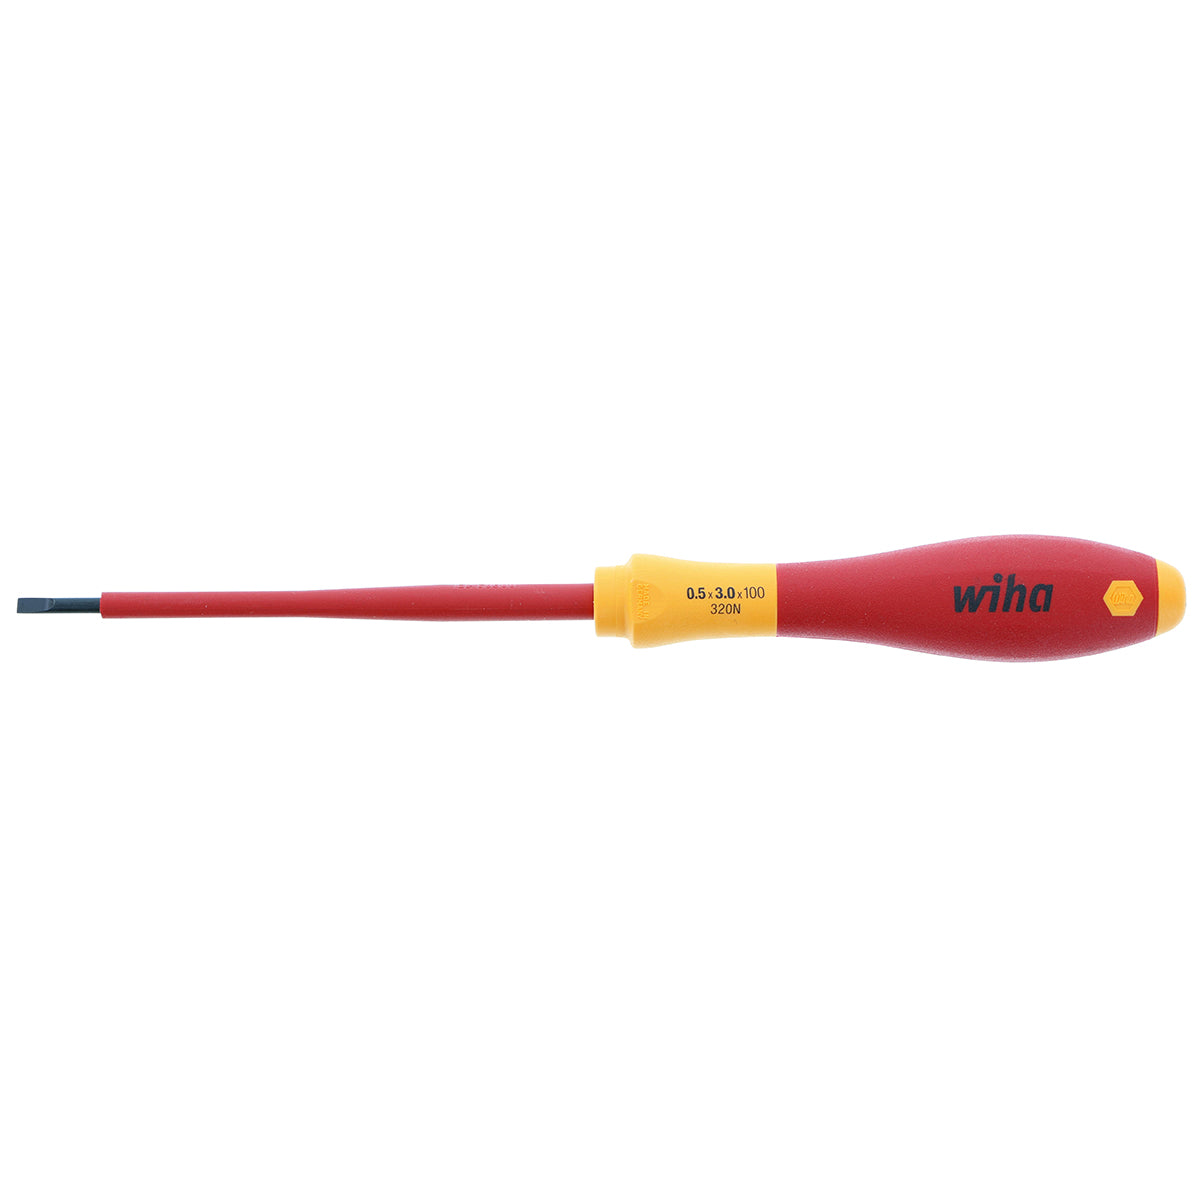 Wiha 32012 Insulated Slotted Screwdriver – 3.0mm x 100mm